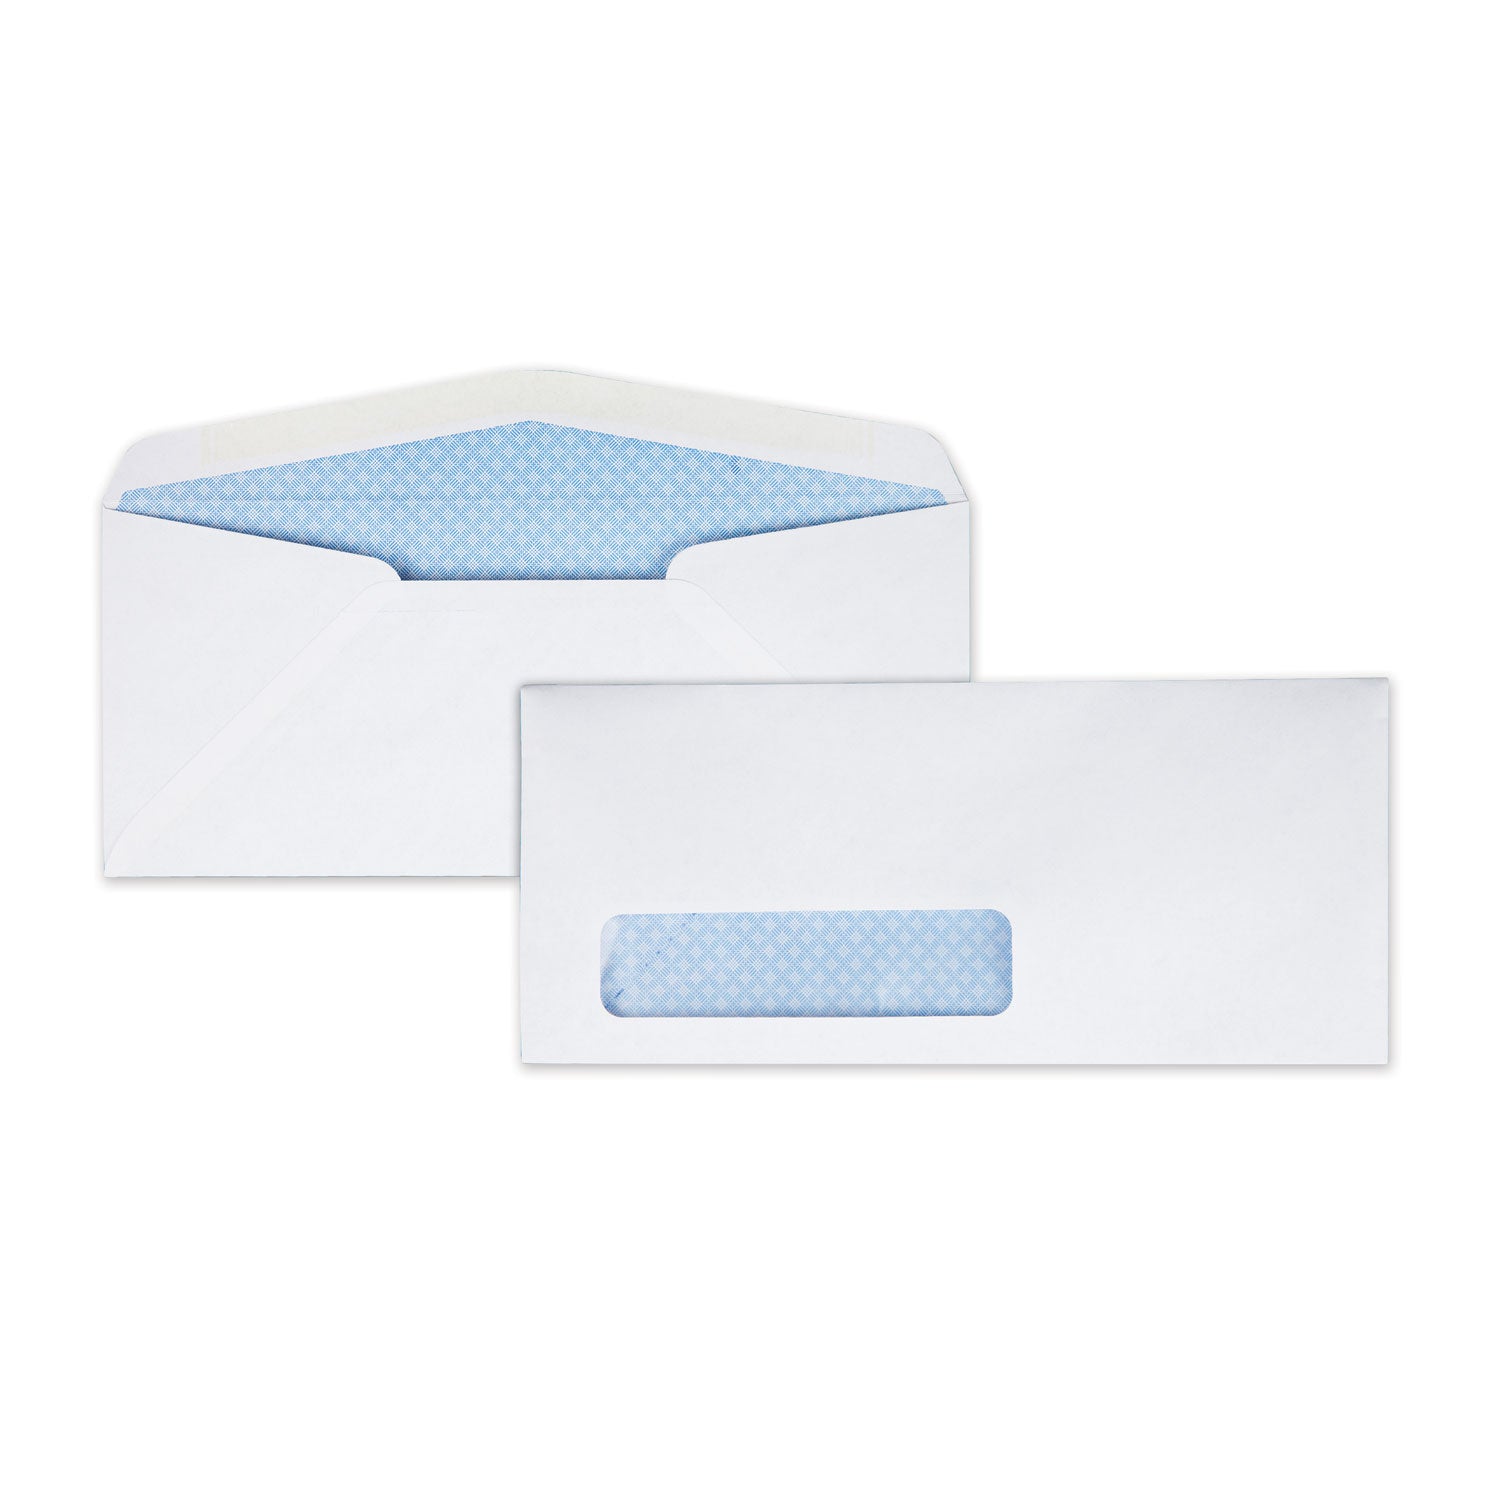 Security Tint Window Envelope, #10, Bankers Flap, Gummed Closure, 4.13 x 9.5, White, 500/Box - 